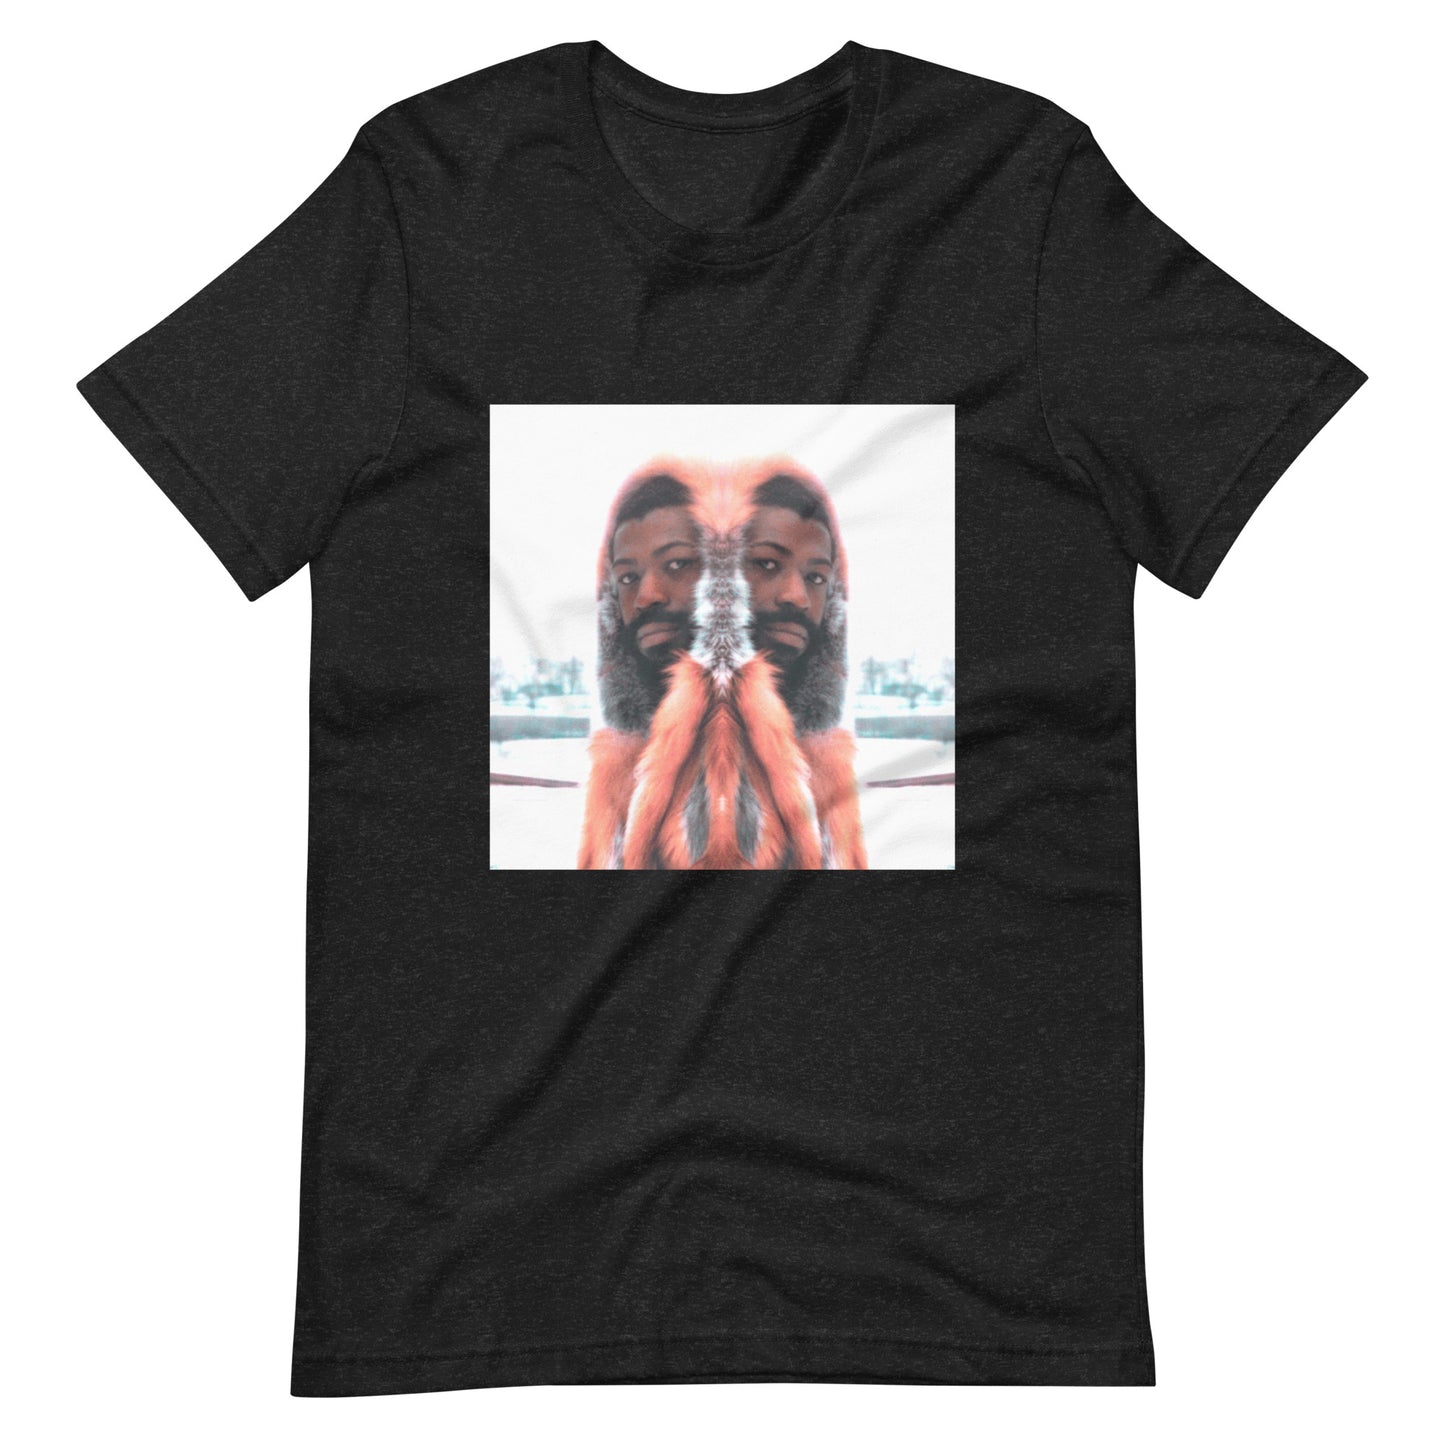 Cooler Than Teddy in a Snowstorm Unisex Tee